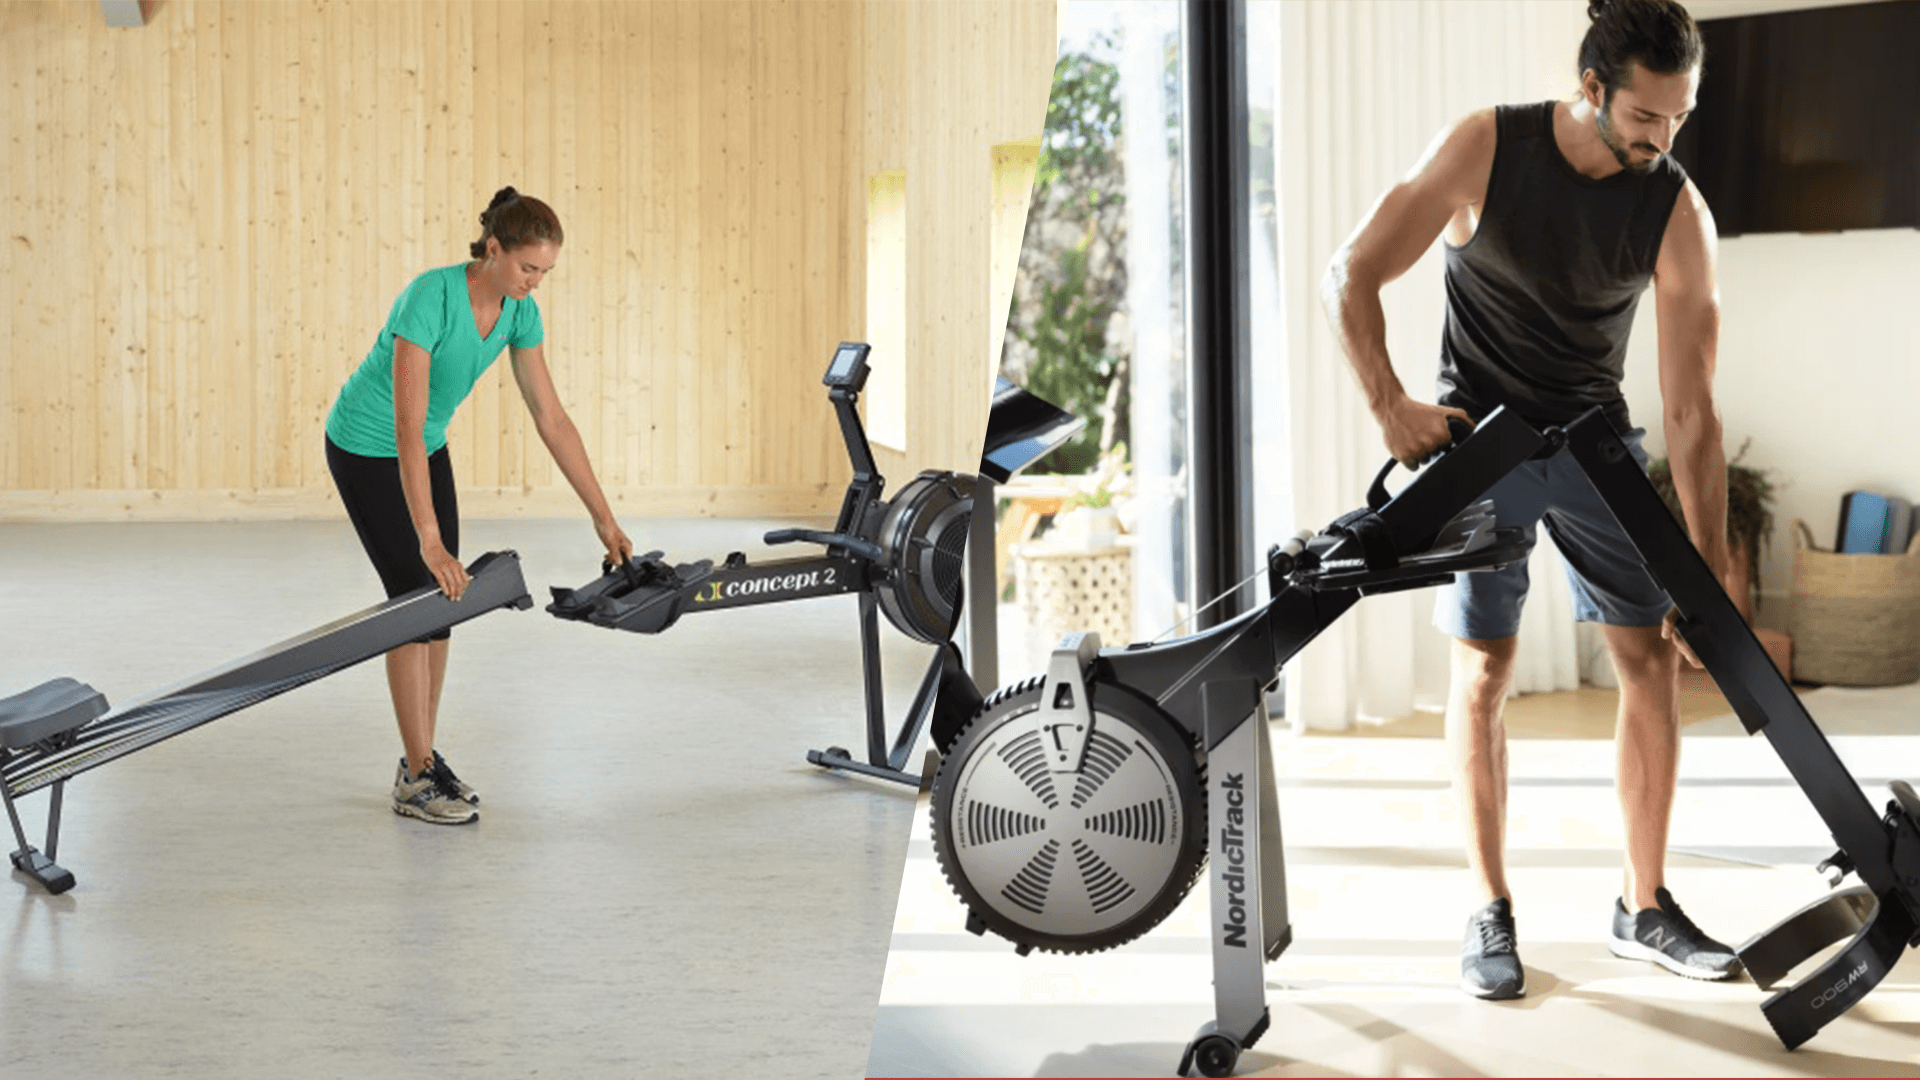 Which Is Easier to Set Up the NordicTrack RW900 or the Concept 2 Model D